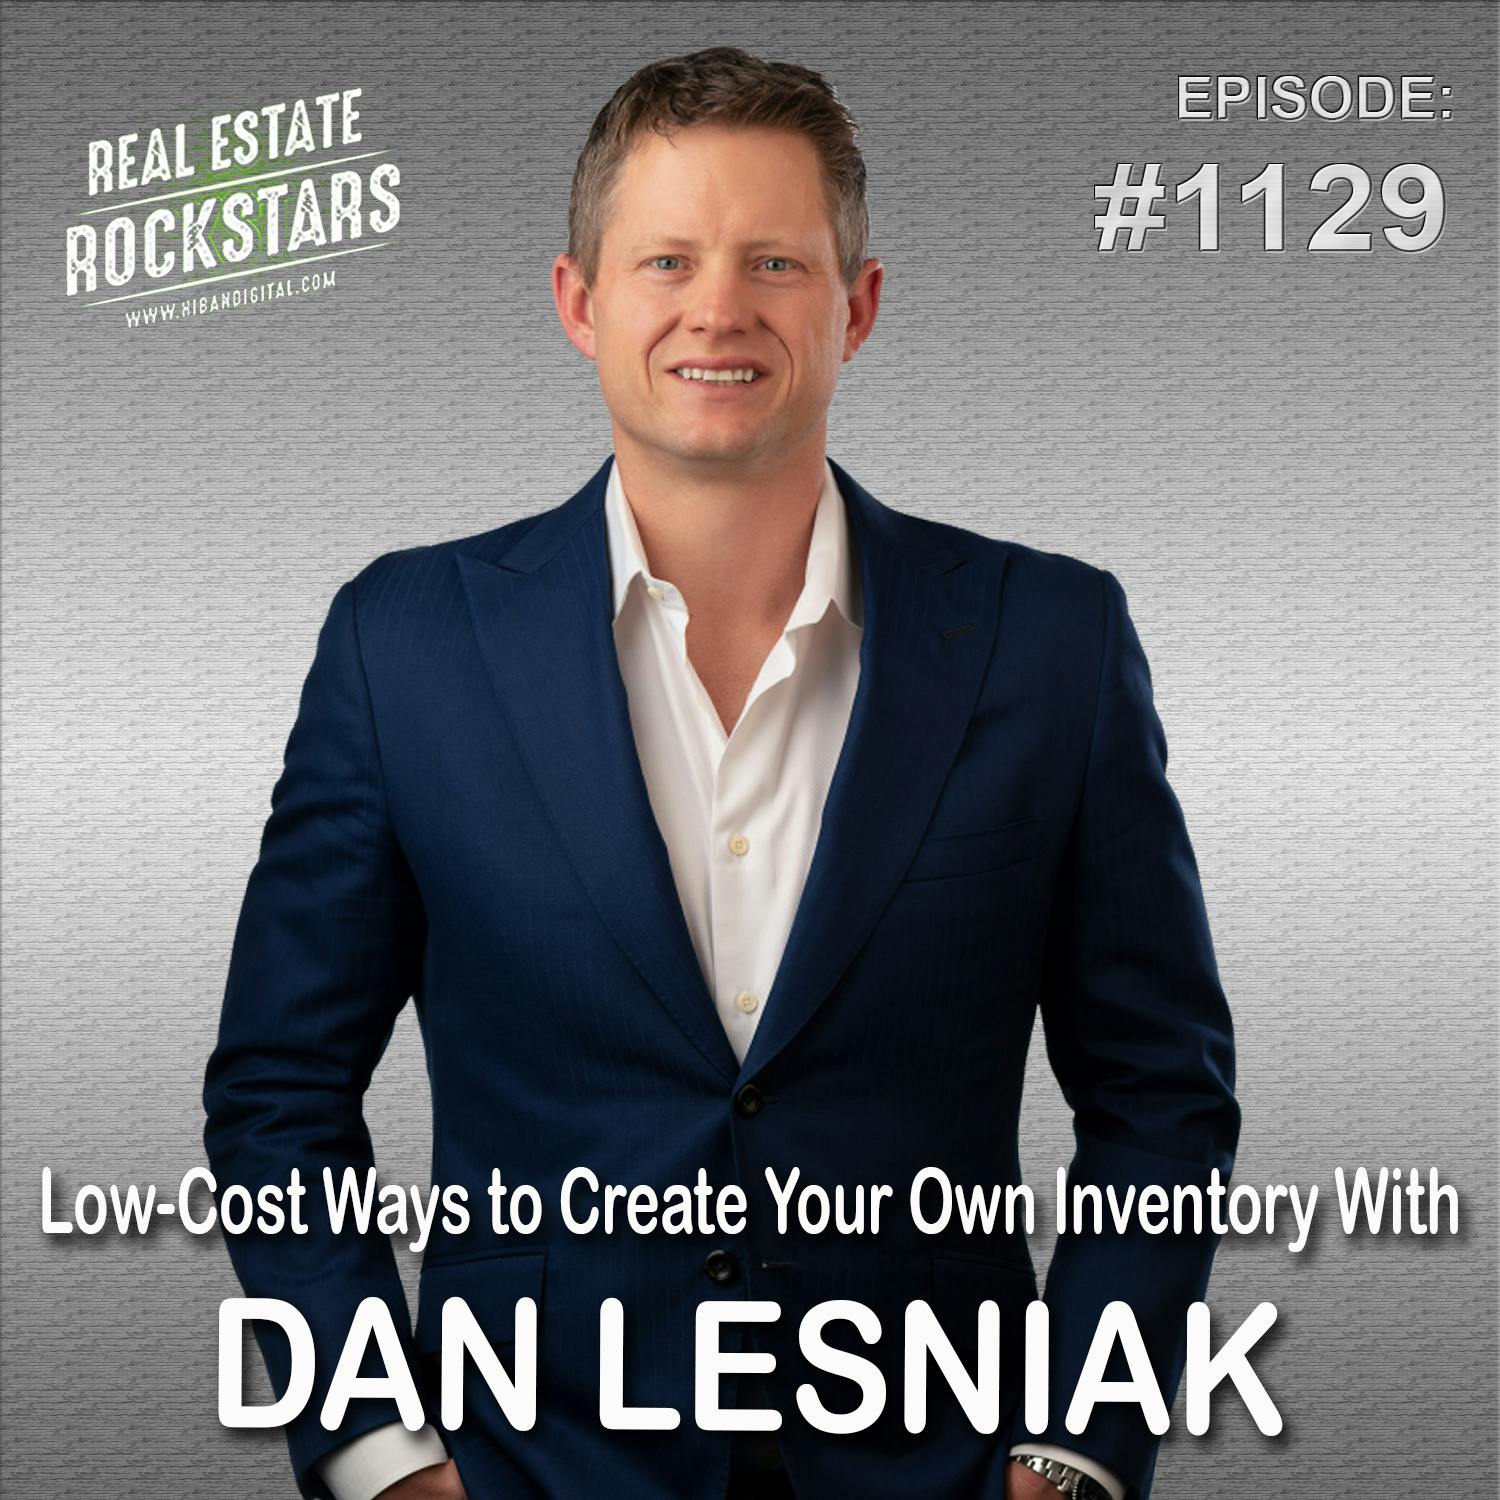 1129: Low-Cost Ways to Create Your Own Inventory With Dan Lesniak